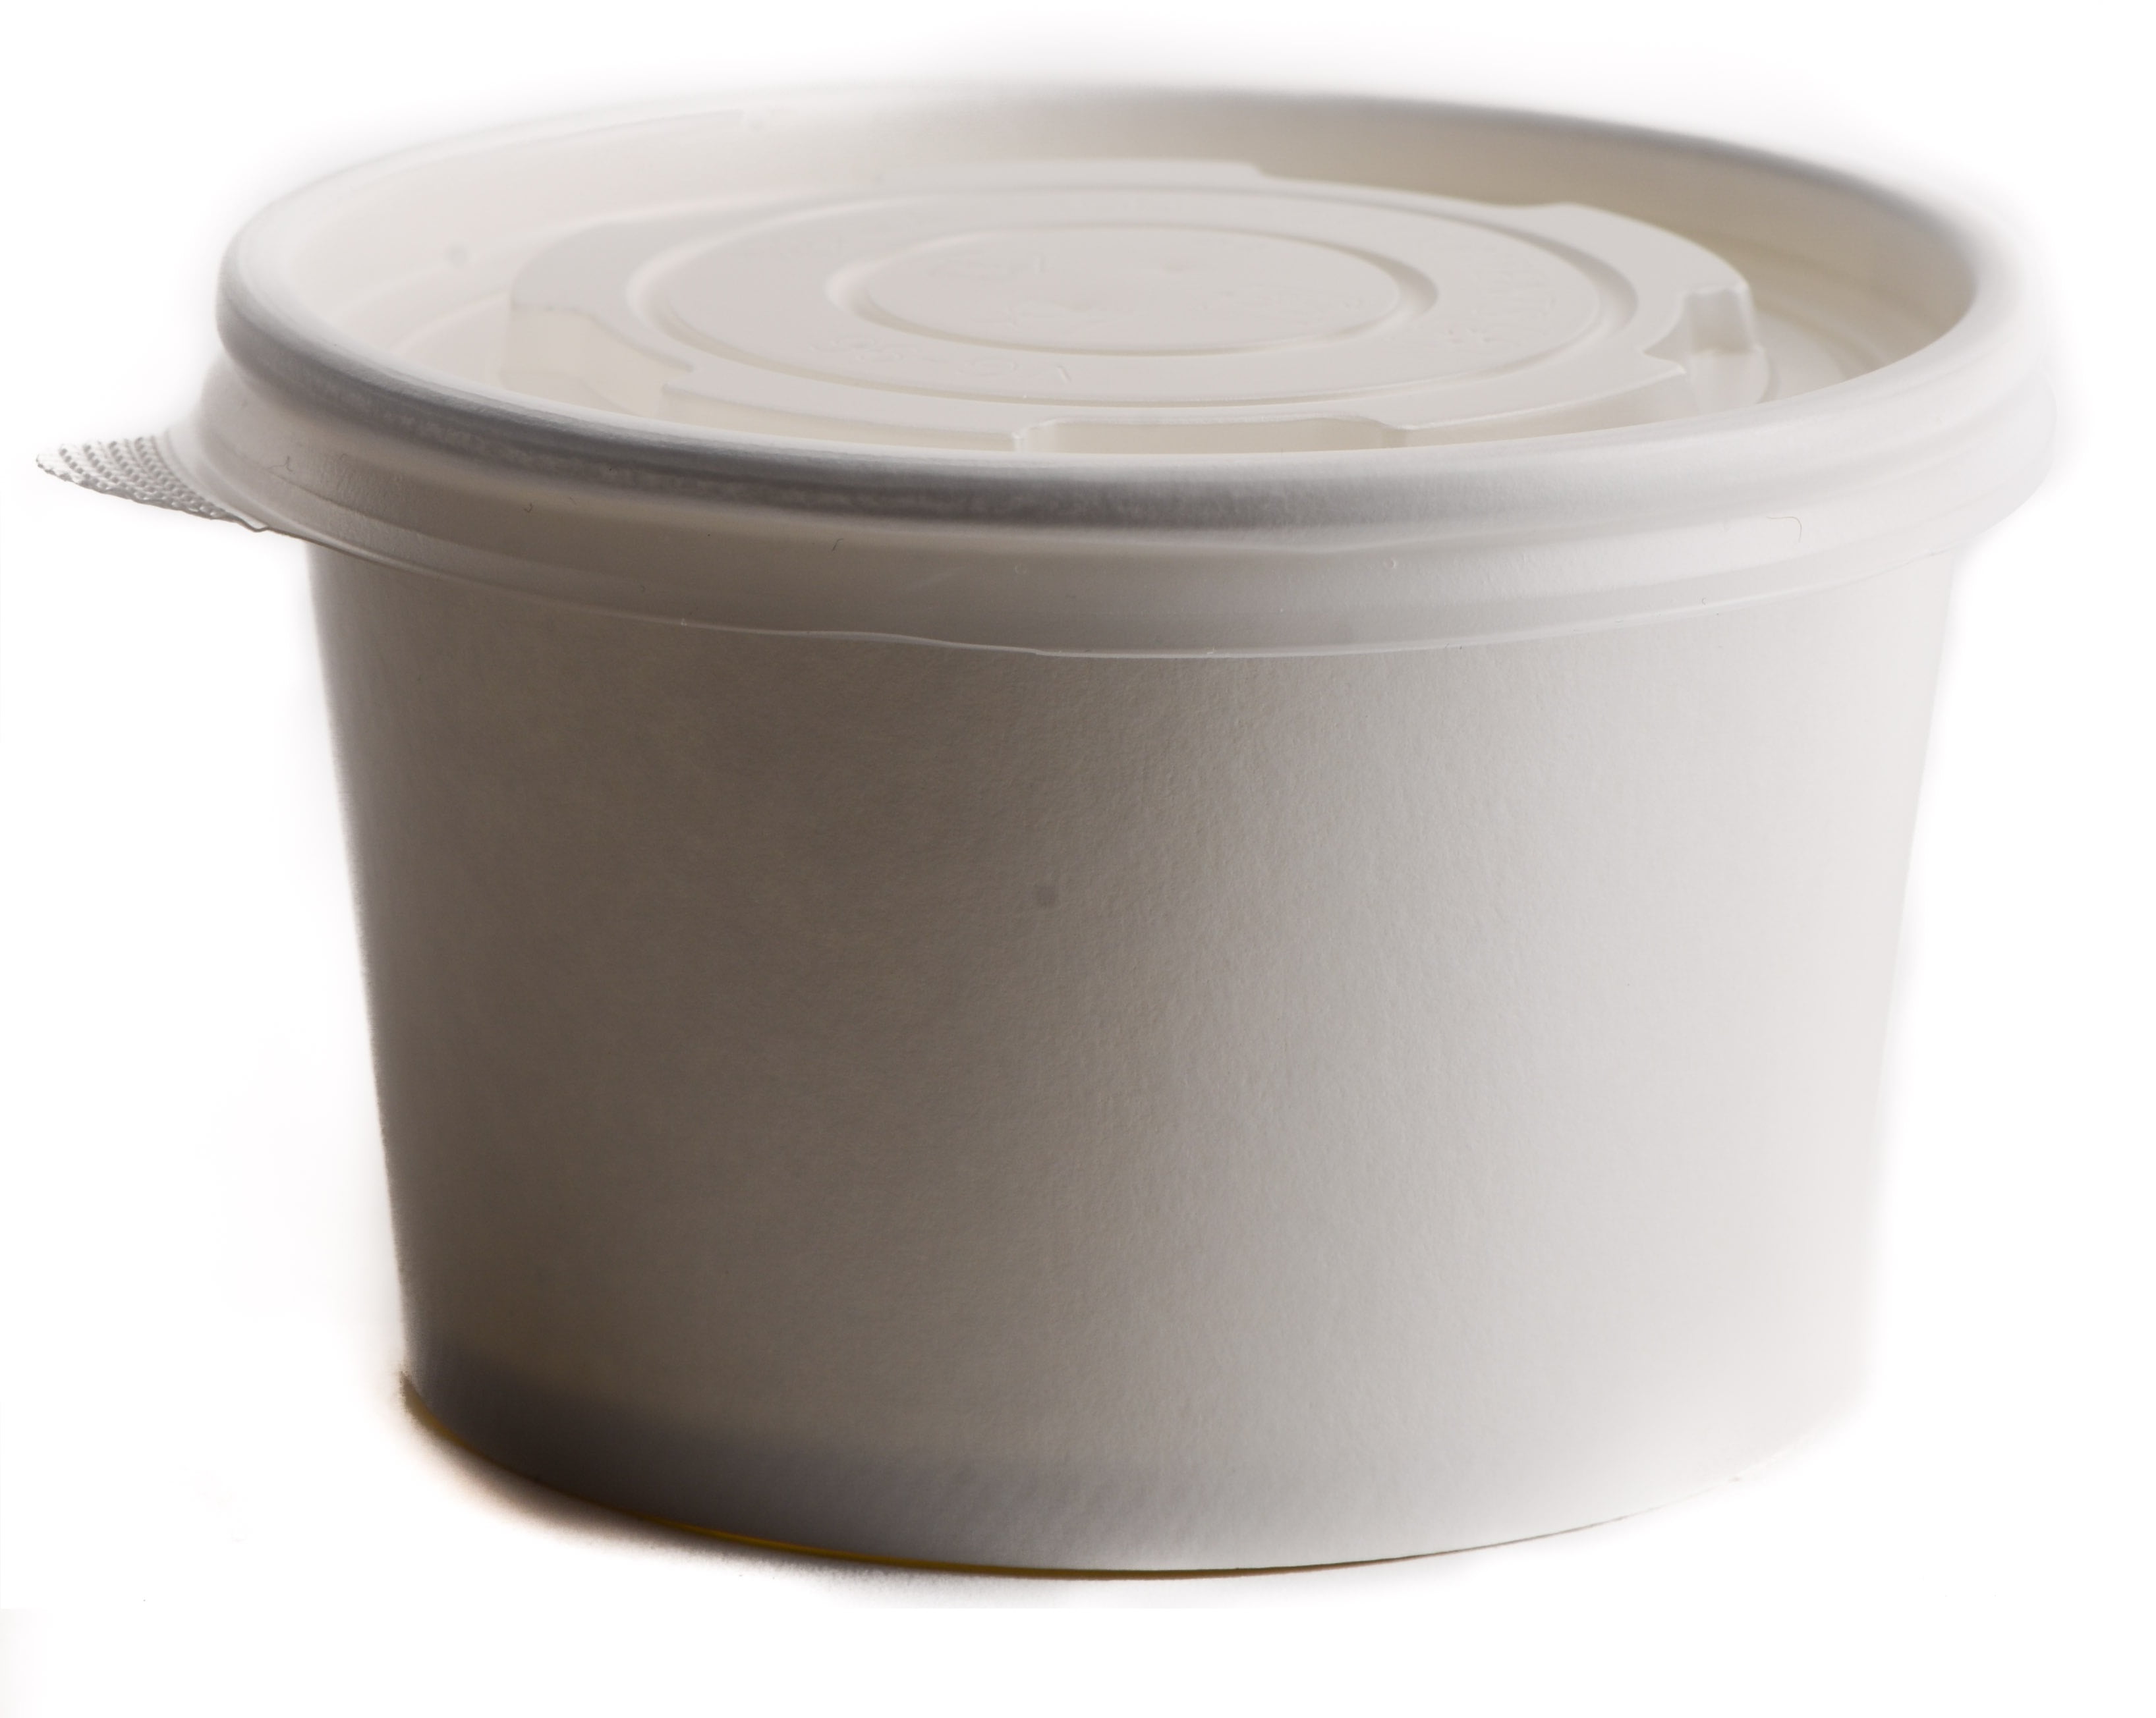 Restaurant to Go Deli Containers 75 Count Take Out Half Pint Ice Cream Containers 12 oz Disposable White Paper Soup Containers with Lids Combo Recyclable Frozen Yogurt Cups Microwavable 